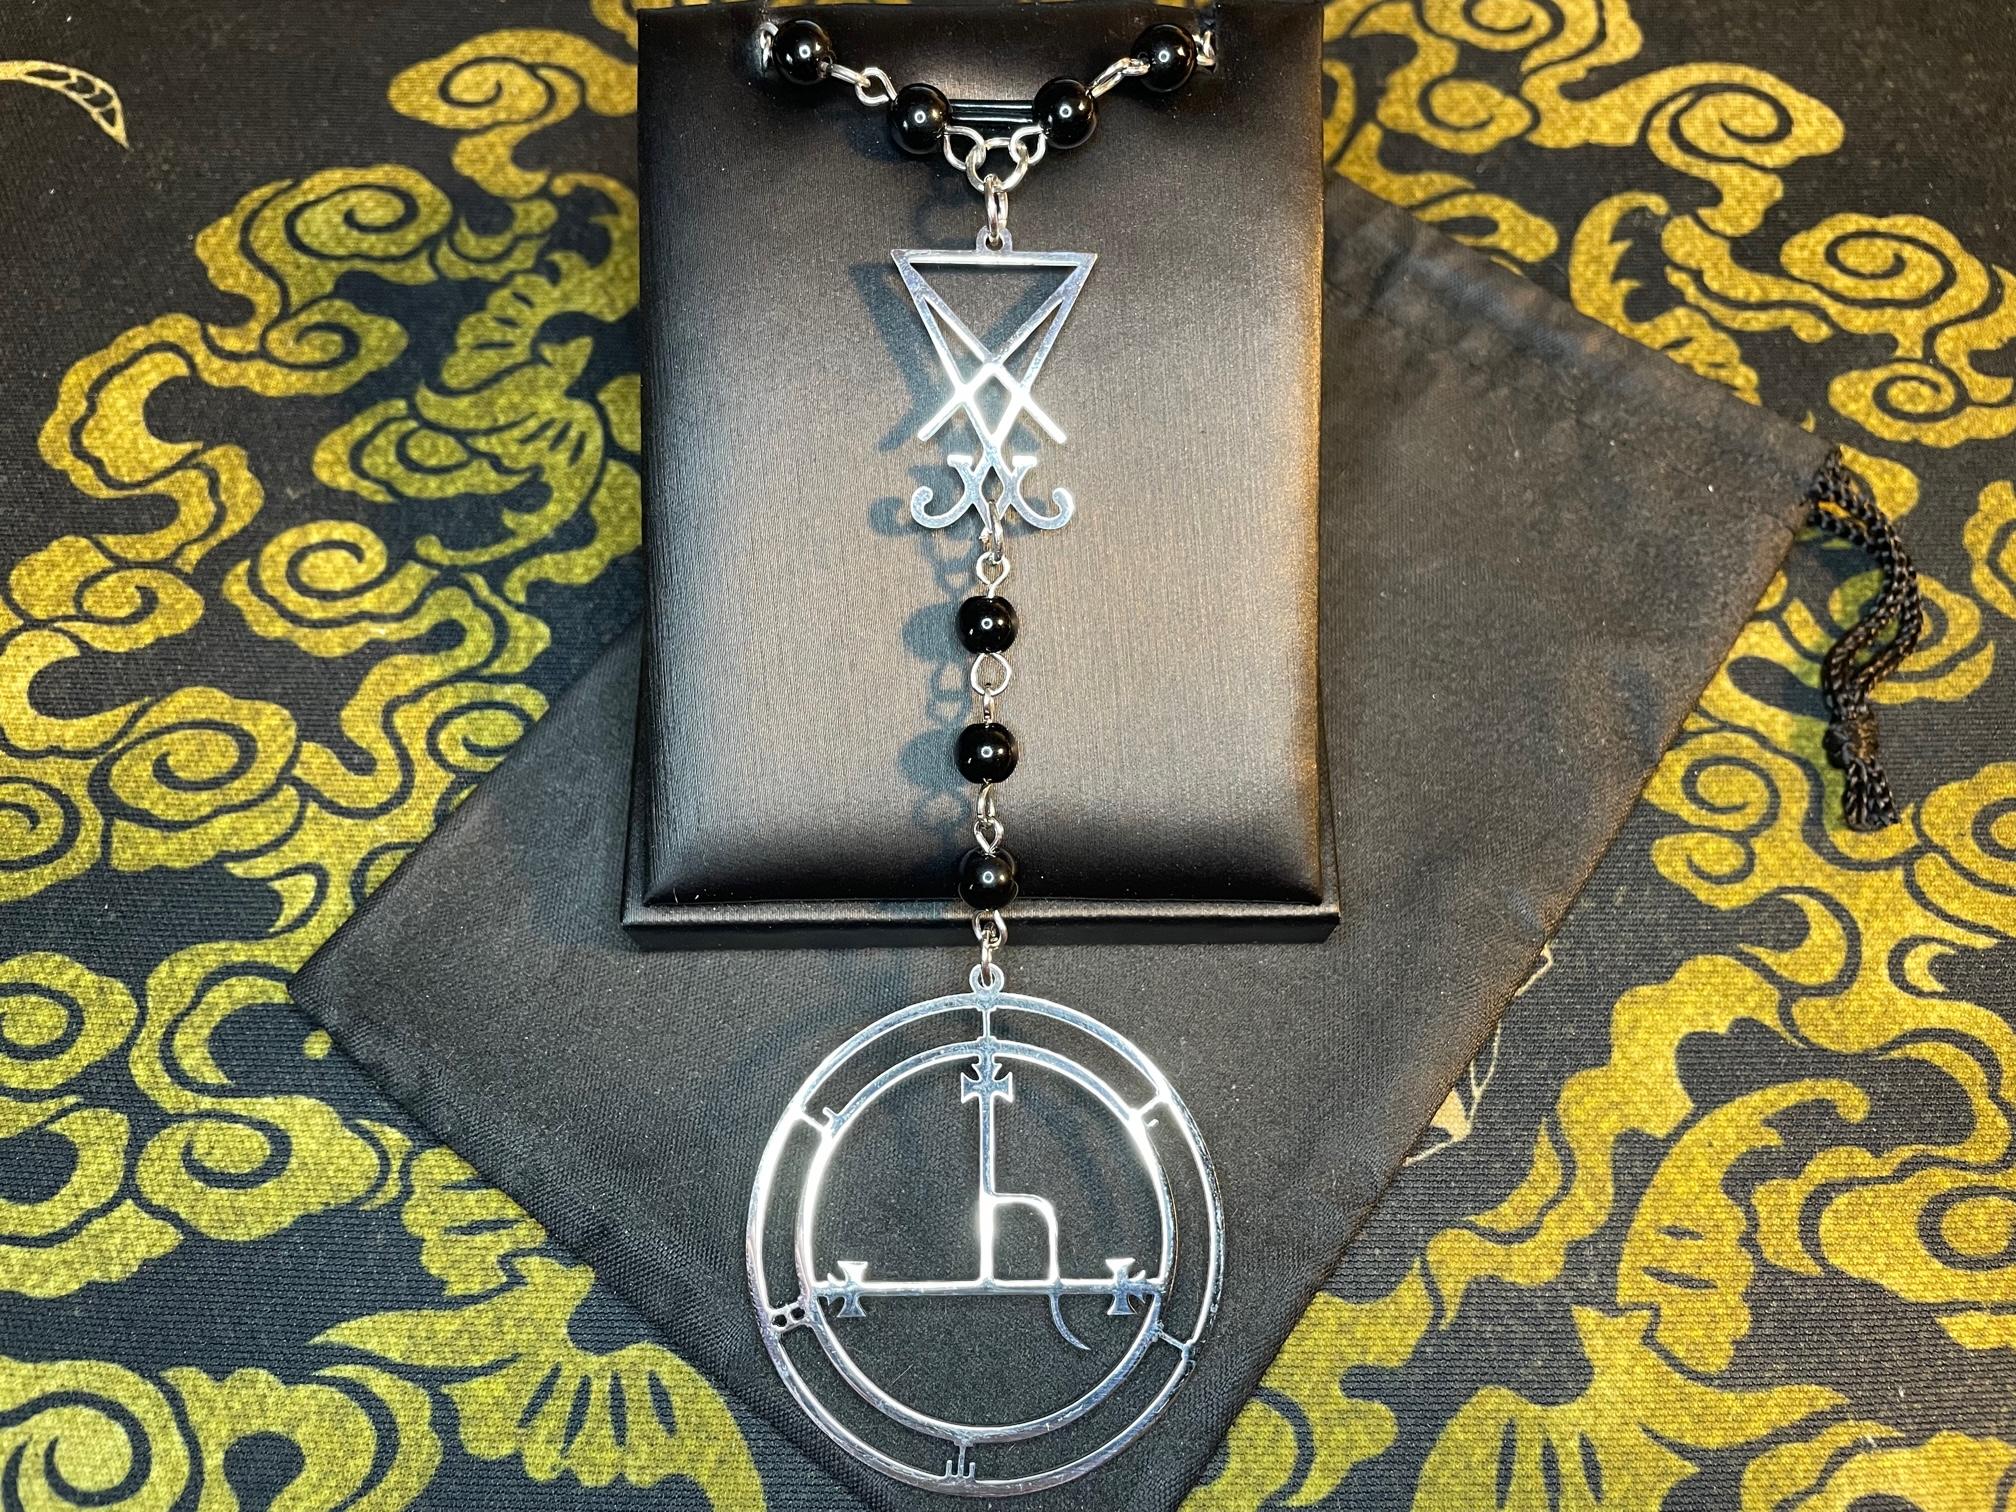 satanic rosary small beads sigil of lucifer demon lilith seal pendant witchcraft magic pagan wiccan occult necklace silver black darkness jewelry